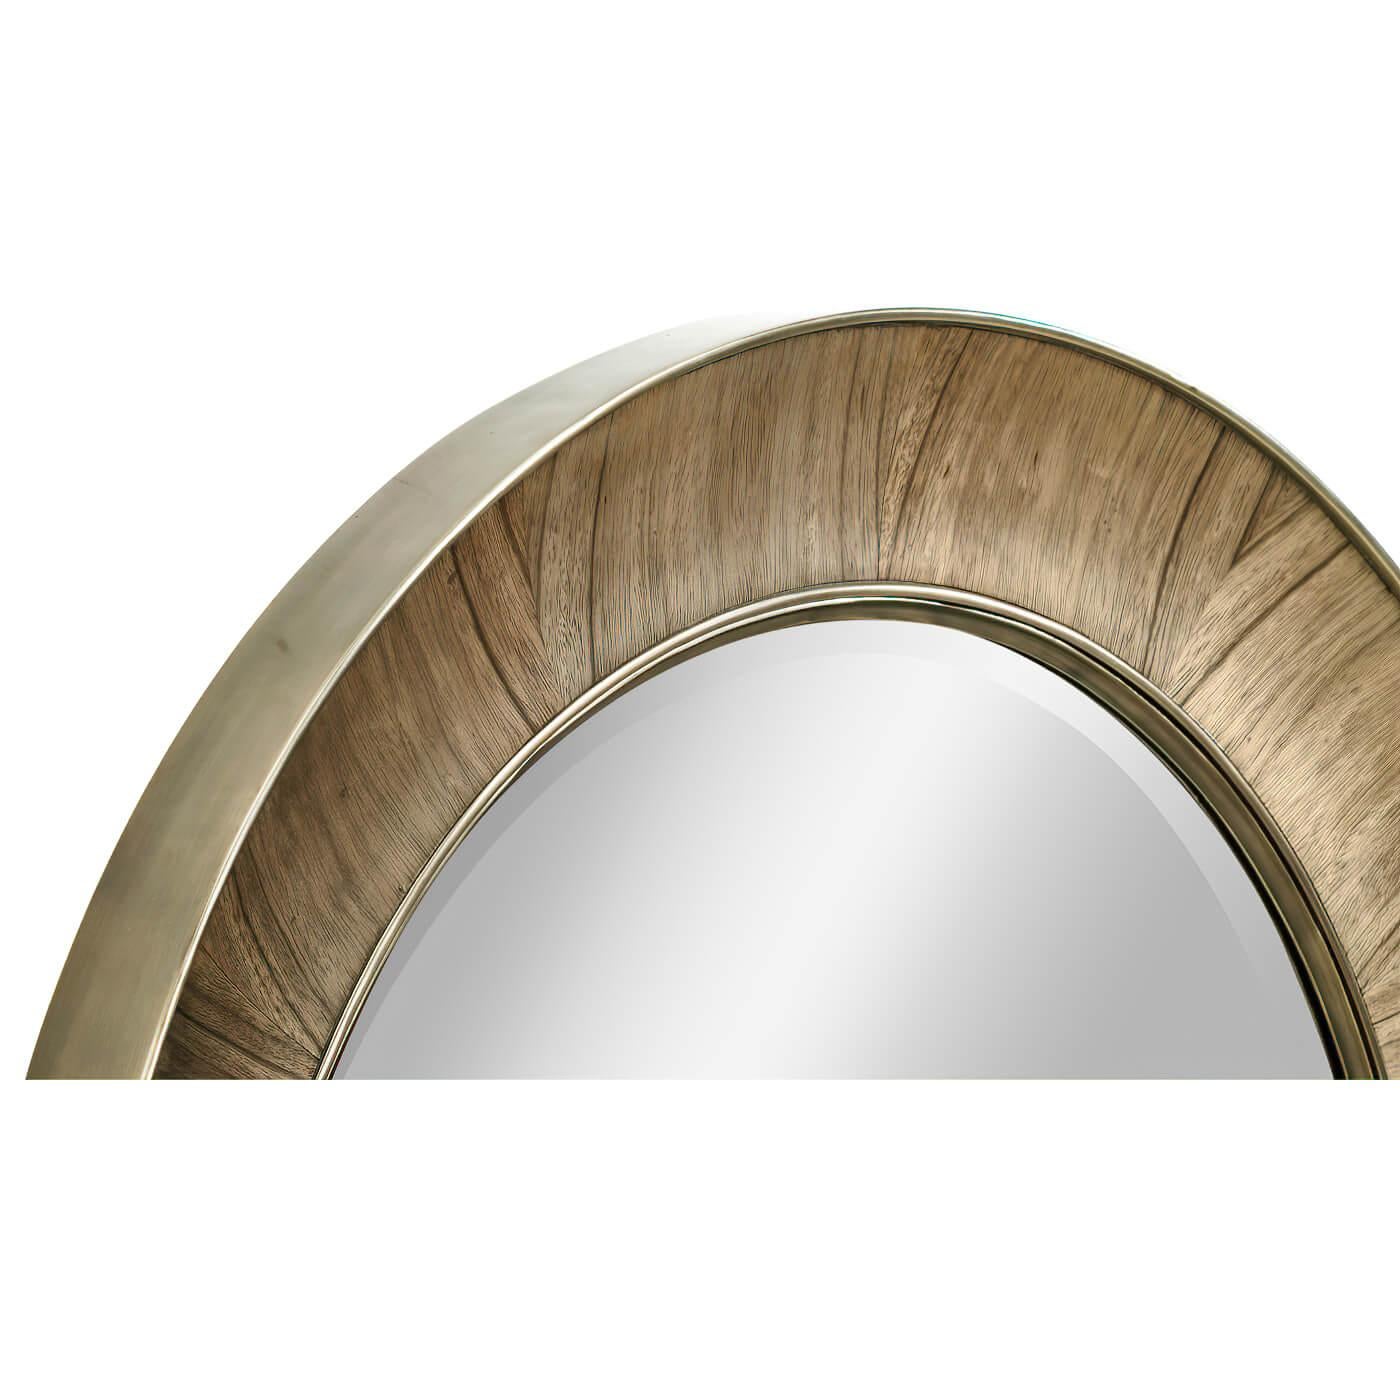 This golden amber veneered concave form round mirror with brass trim and a beveled mirror plate.

Dimensions: 38